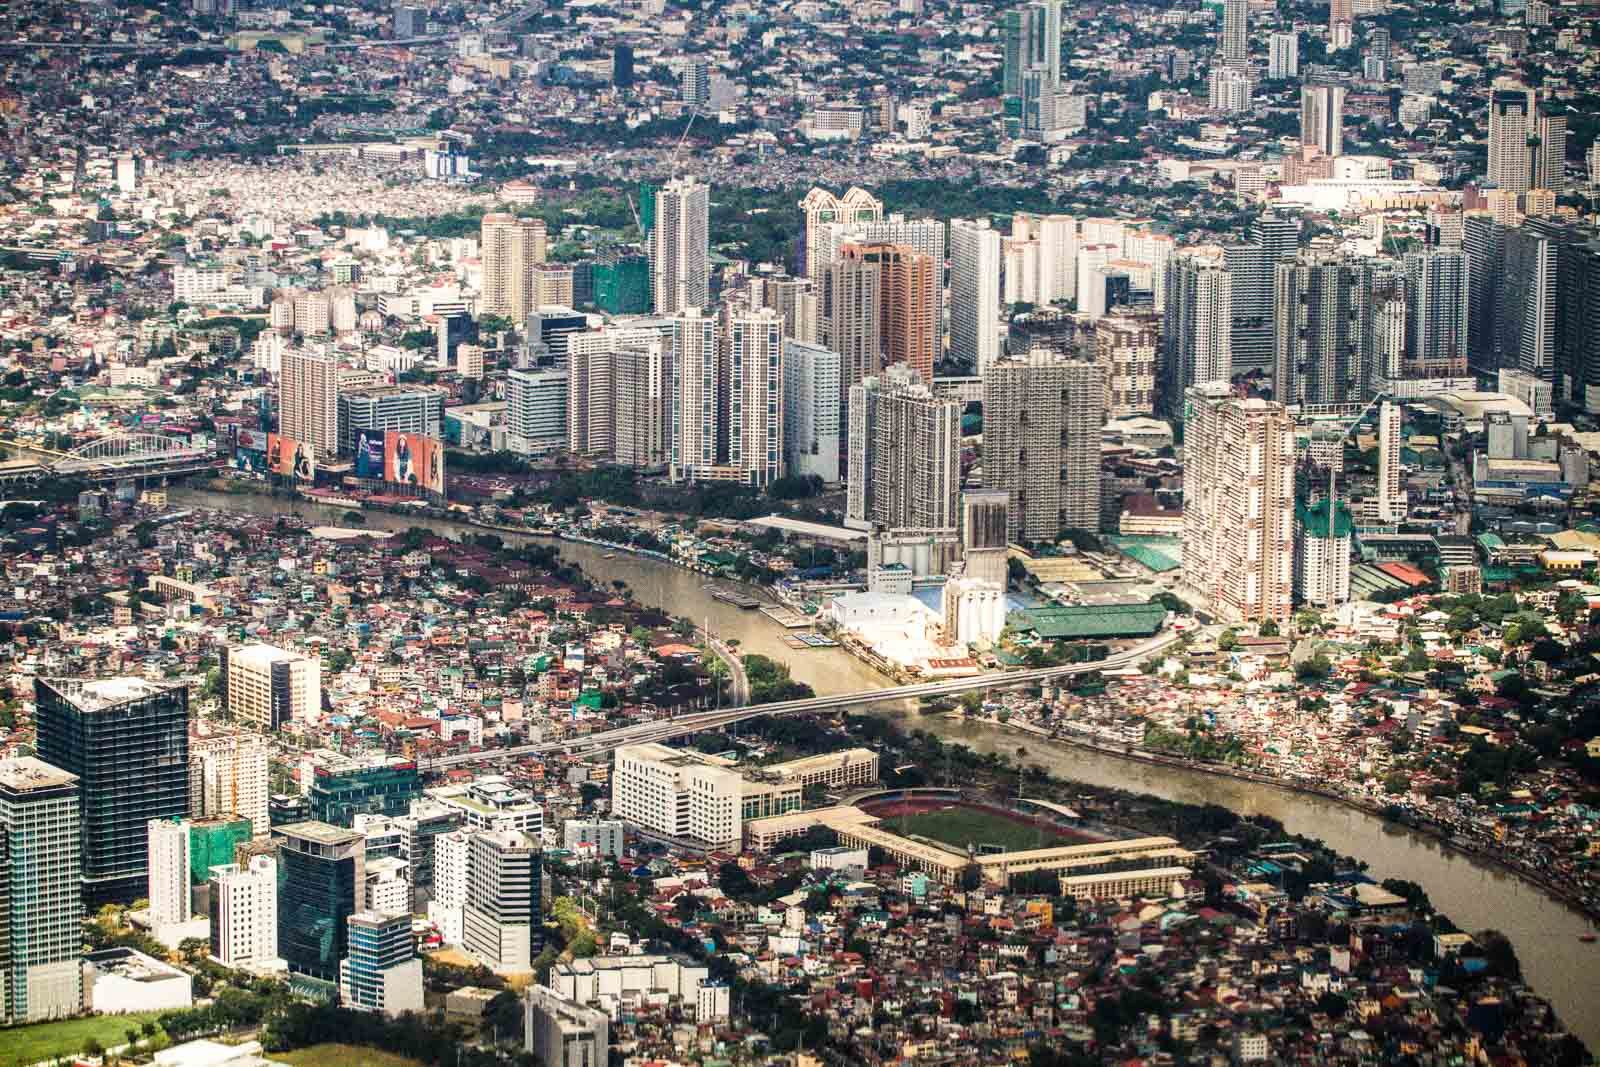 Philippine GDP grows 8.3% in Q1 2022 as consumer spending recovers